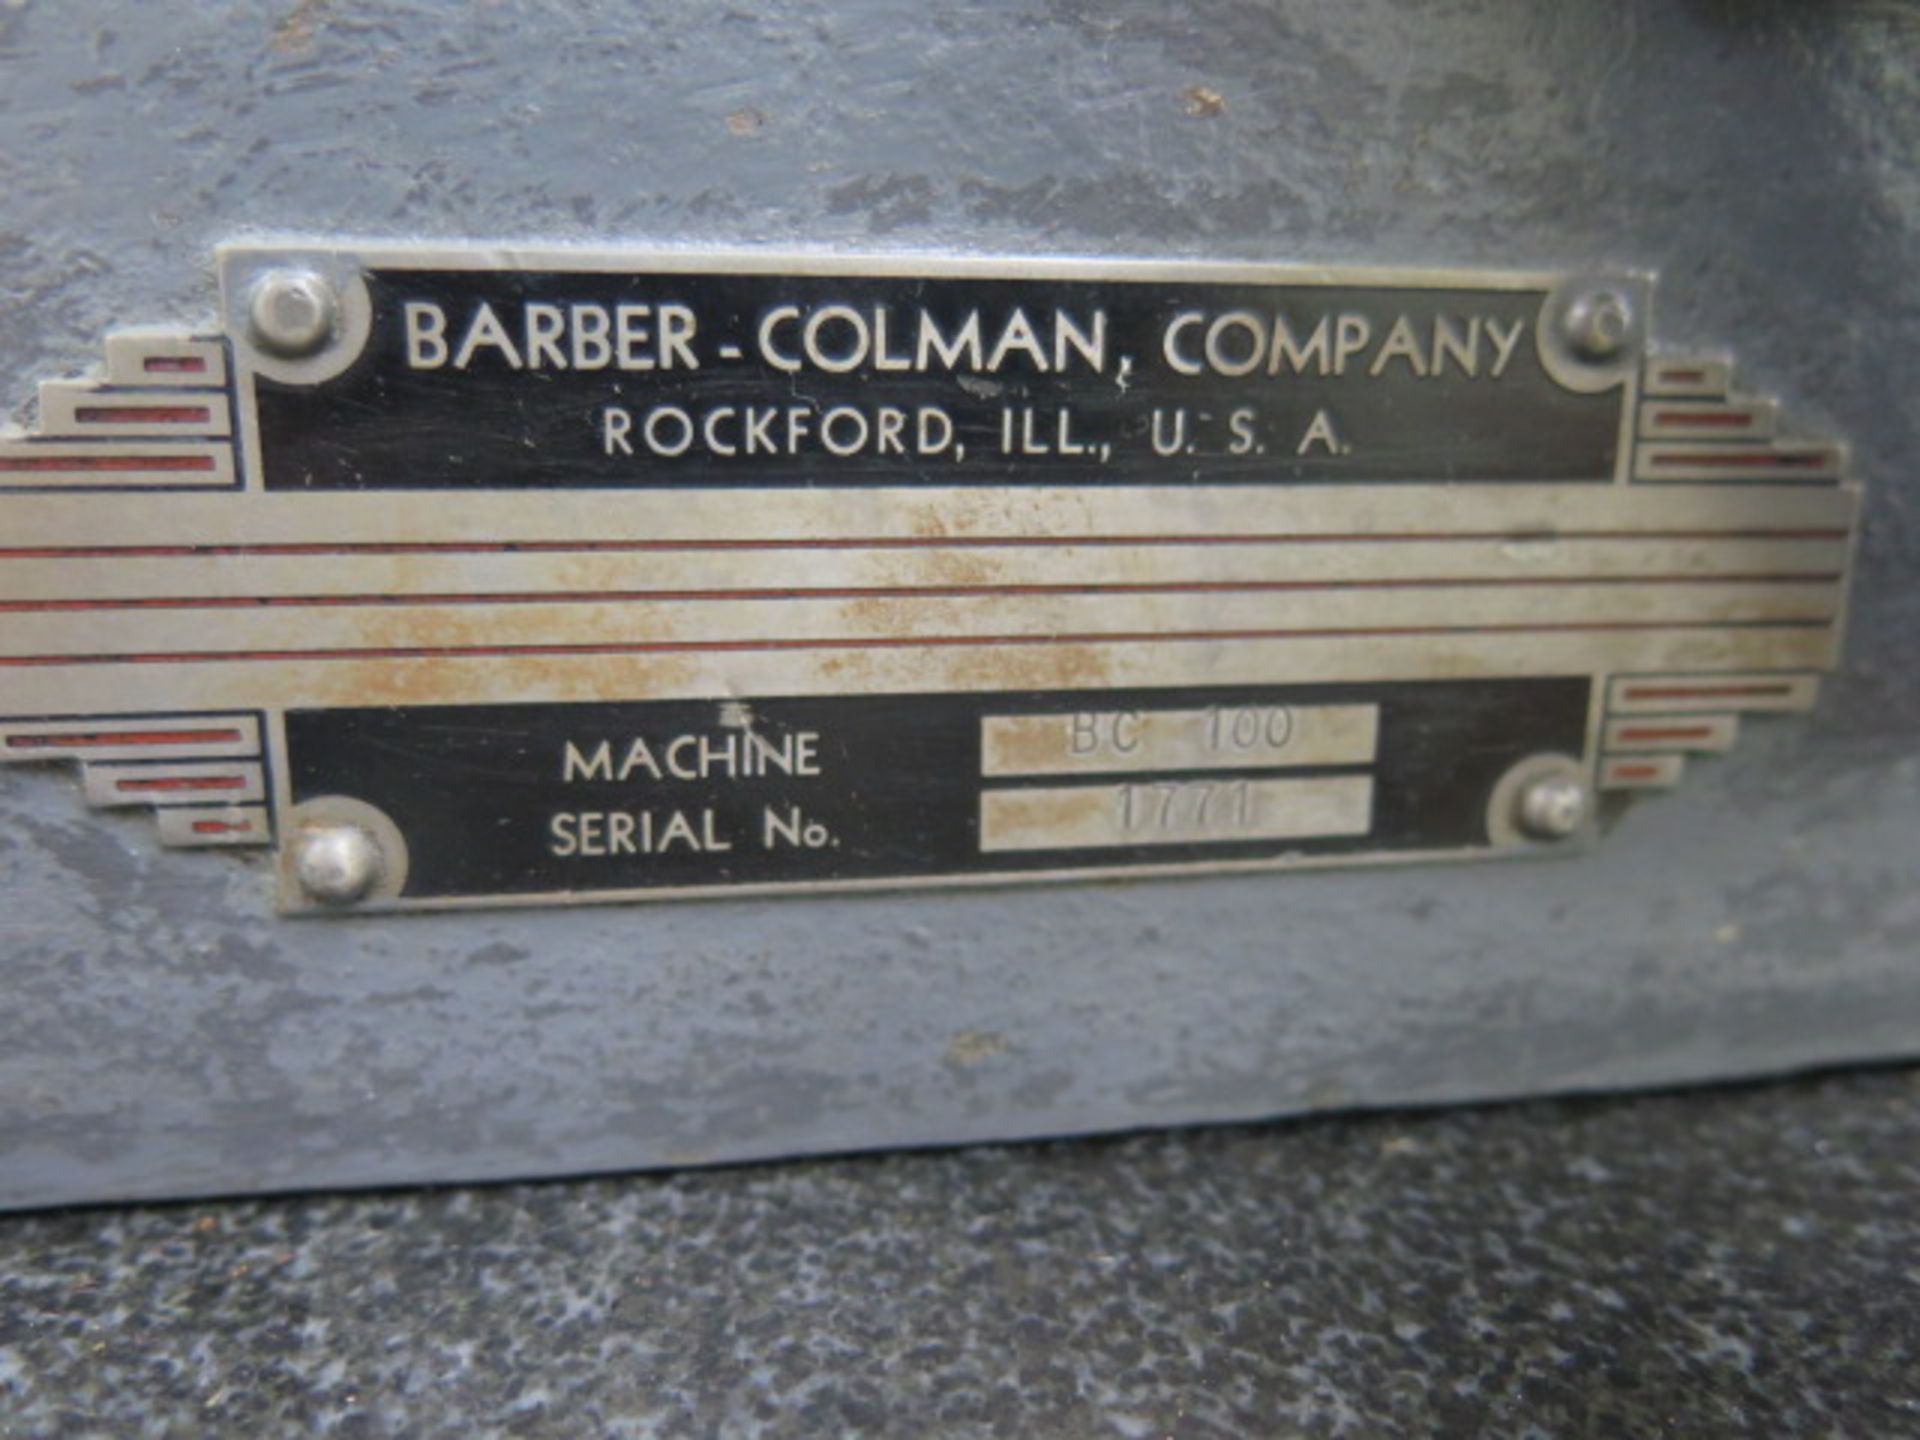 Barber-Colman BC-100 6" x 16" Bench Center s/n 1771 (SOLD AS-IS - NO WARRANTY) - Image 7 of 7